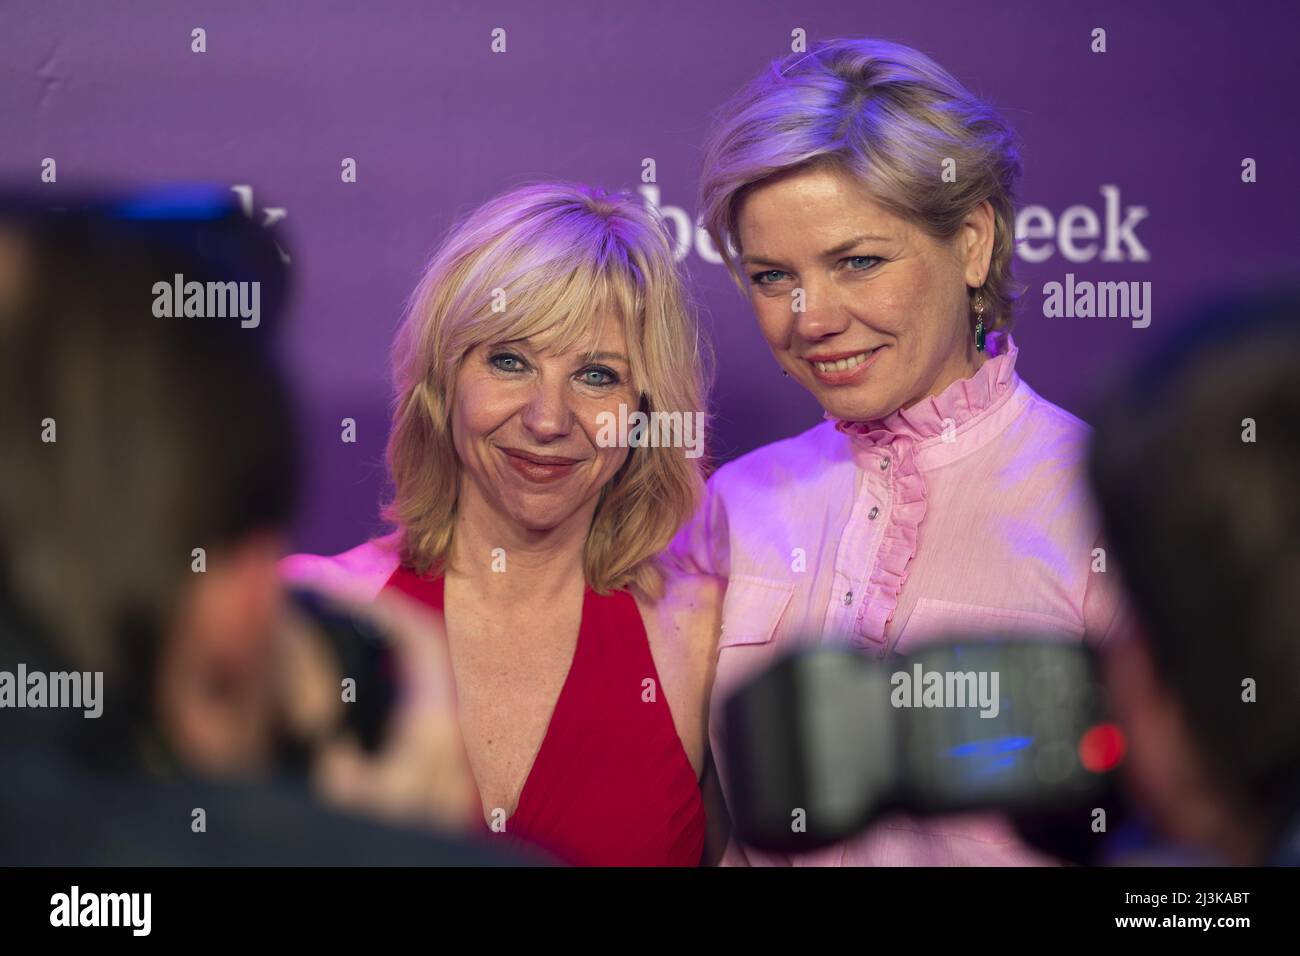 Amsterdam, Netherlands. 08th Apr, 2022. 2022-04-08 21:50:52 AMSTERDAM - Claudia de Breij and Jessica van Geel on the red carpet prior to the Boekenbal, the traditional opening of the Boekenweek. The theme of the party is The night is of love, which ties in with first love, the subject of the Boekenweek. ANP JEROEN JUMELET netherlands out - belgium out Credit: ANP/Alamy Live News Stock Photo